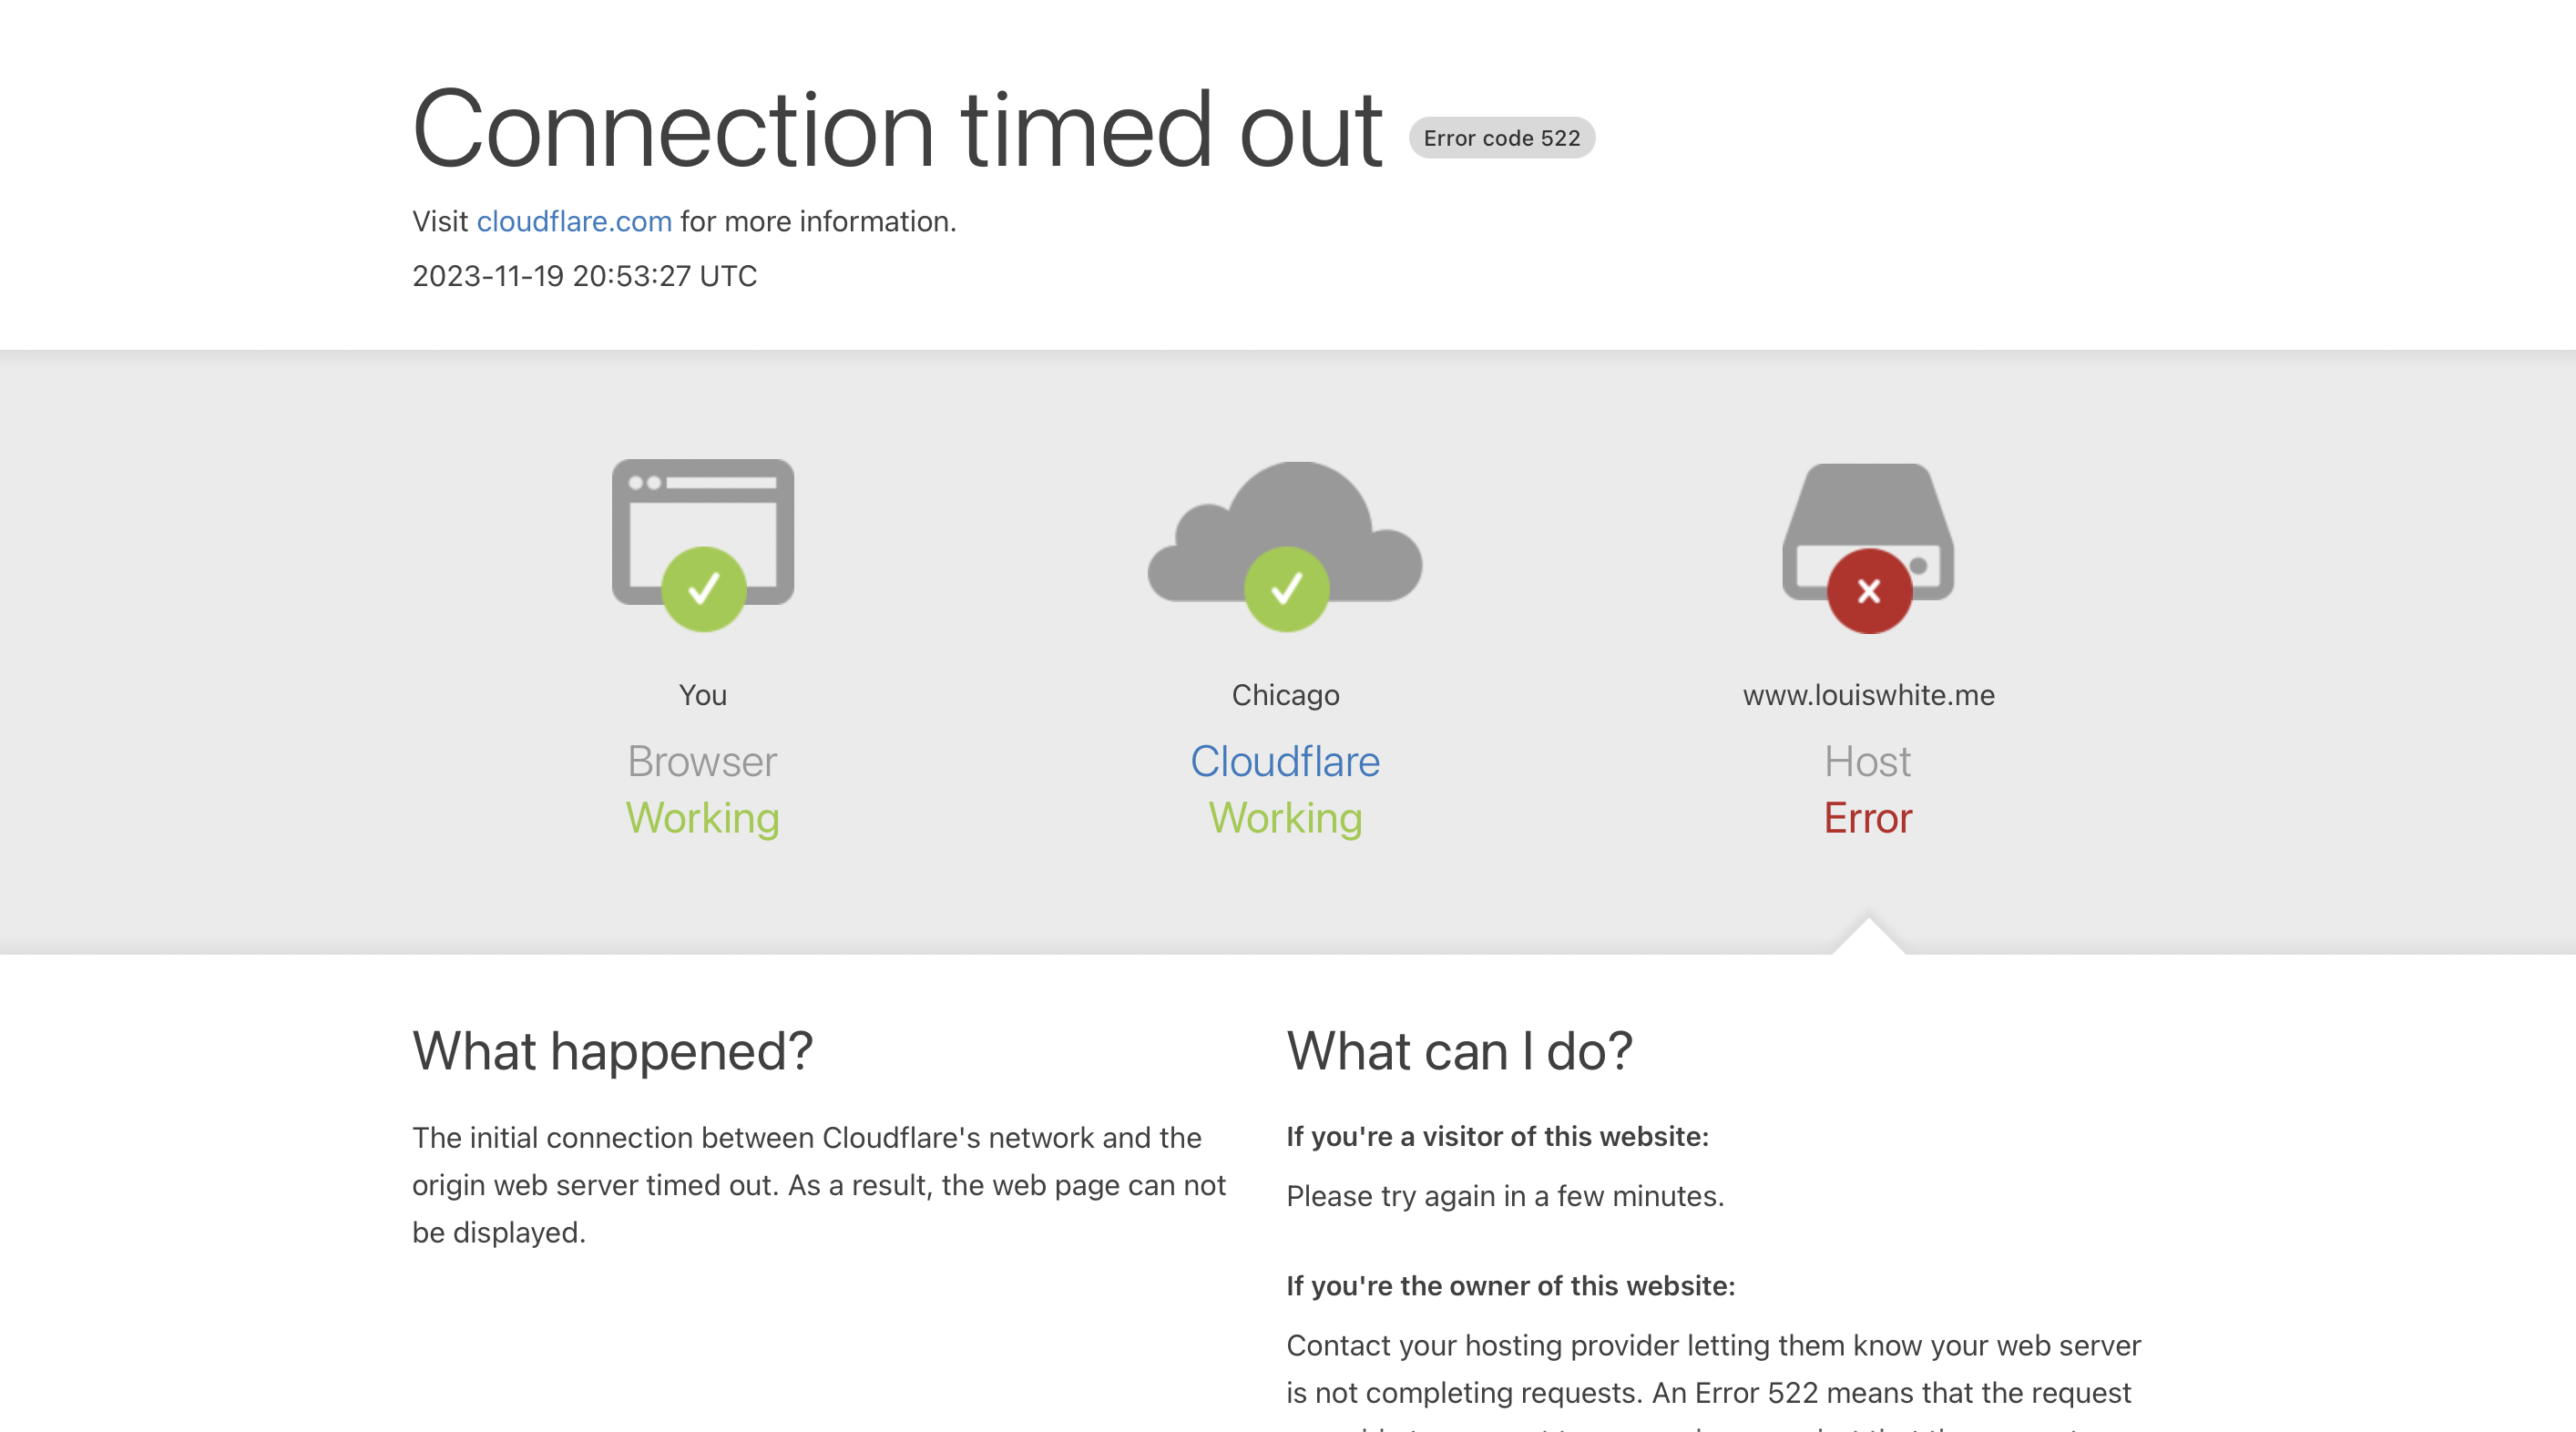 A "Connection timed out" status page from cloudflare